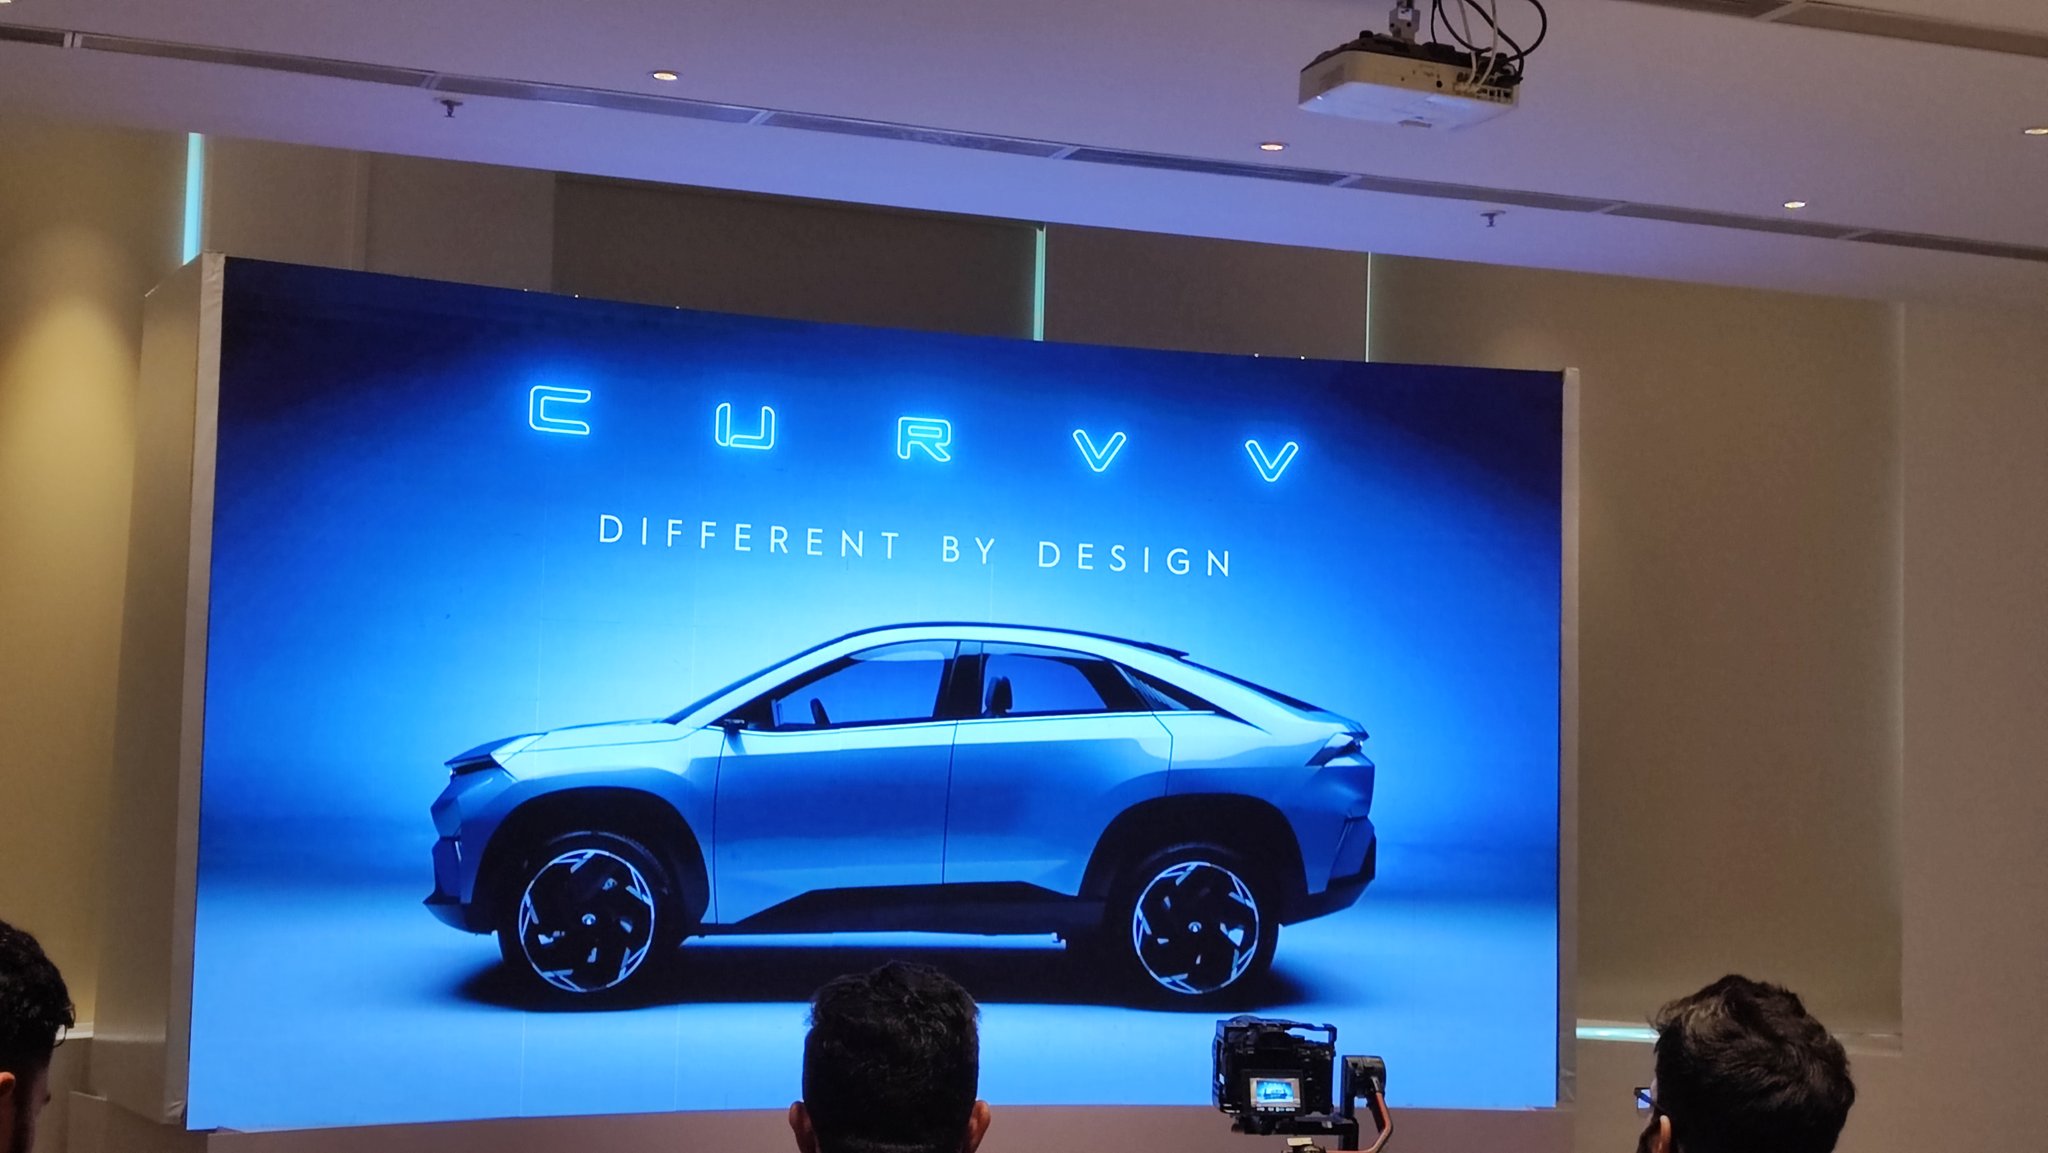 <p>Hints of the Nexon EV in there, but with smarter, sharper lines. Like the Coupe like silhouette. Very racy, and should make quite an impact with an audience looking for handsome EVs. The CURVV though does not seem to have many curves!</p>